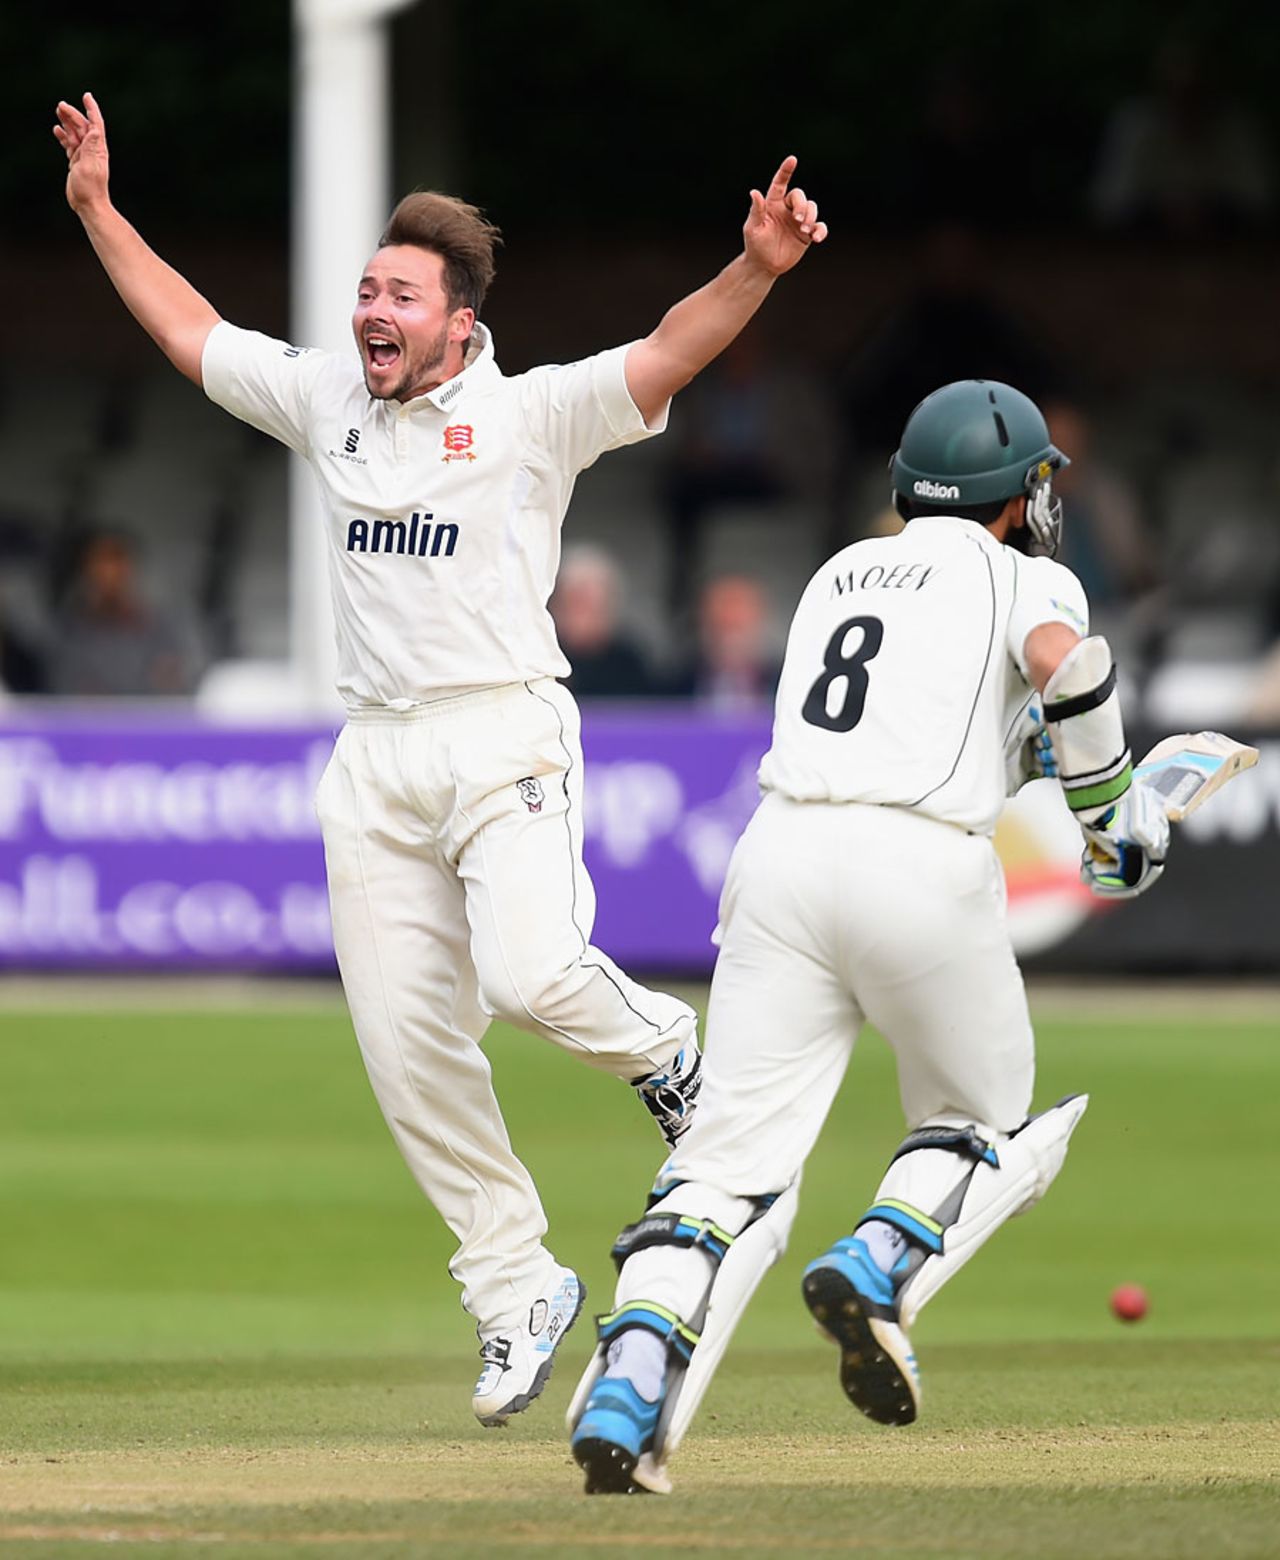 Graham Napier blew away Worcestershire's middle order, Essex v Worcestershire, County Championship, Division Two, Chelmsford, September 25, 2014